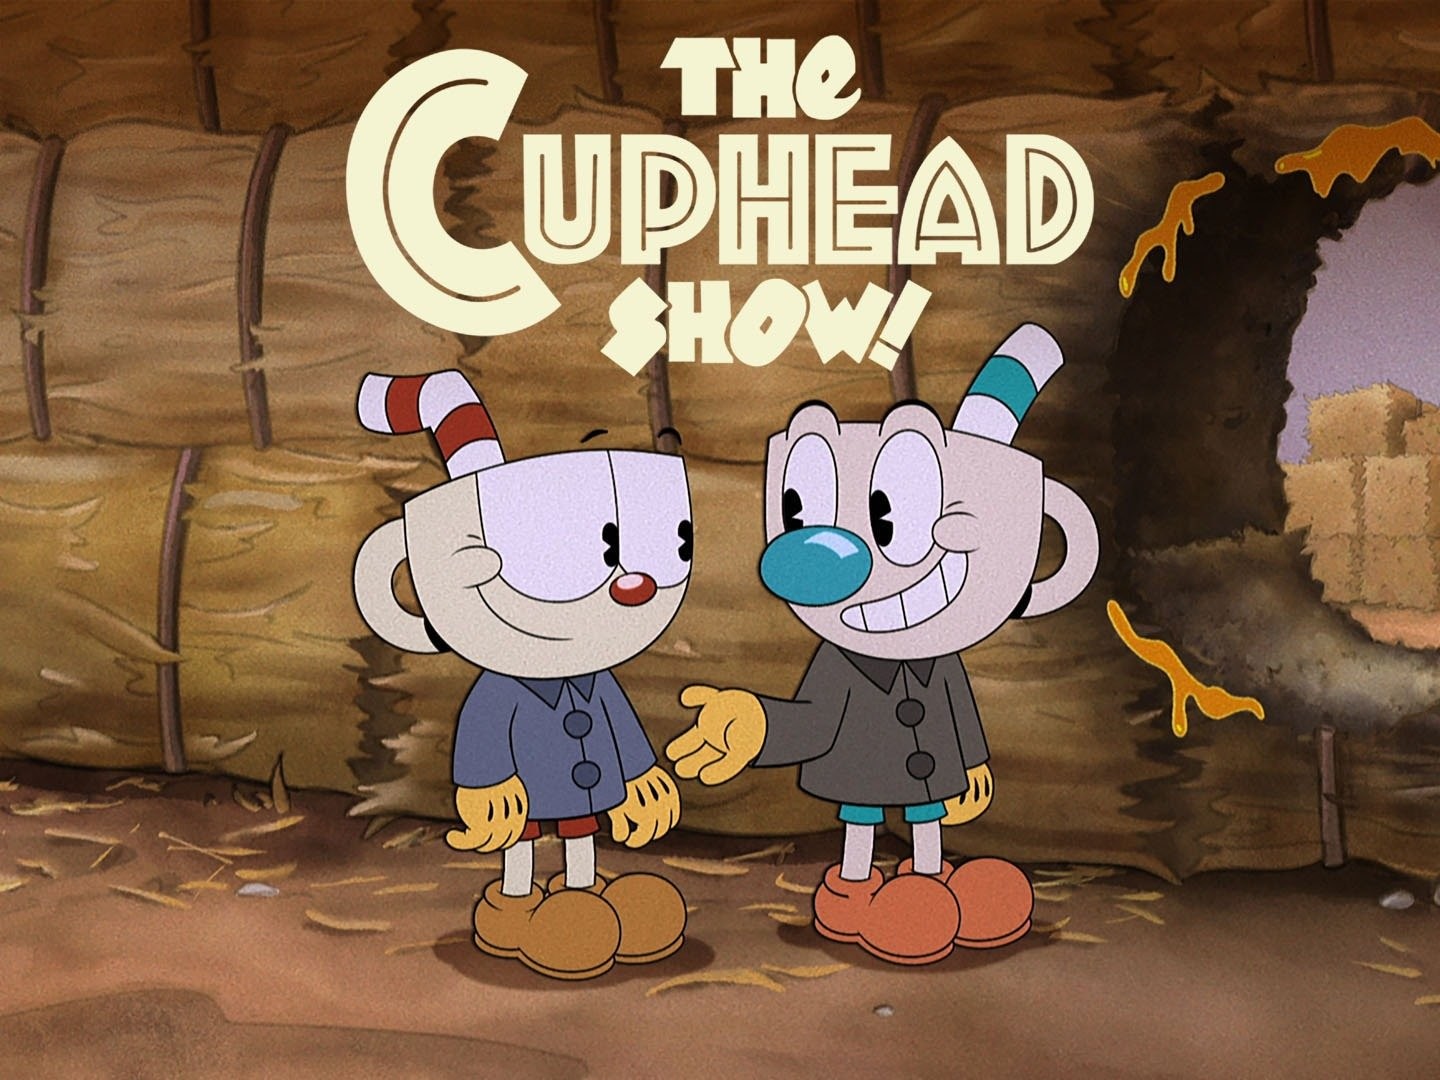 The Cuphead Show Season 2 Trailer: Who Drugged My Coffee This Morning?